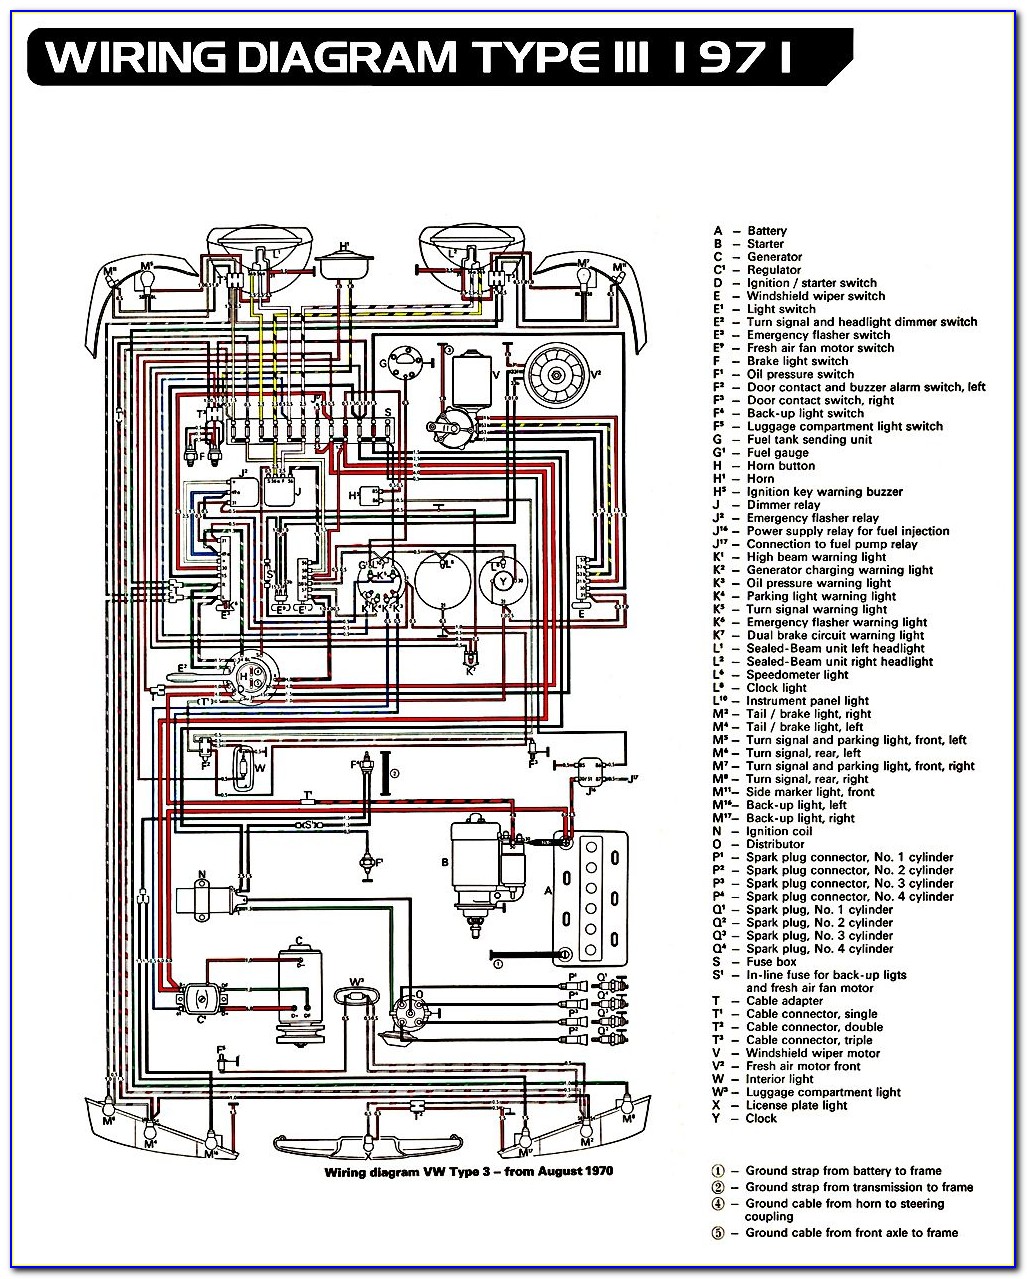 1971 Vw Super Beetle Ignition Switch Wiring Diagram